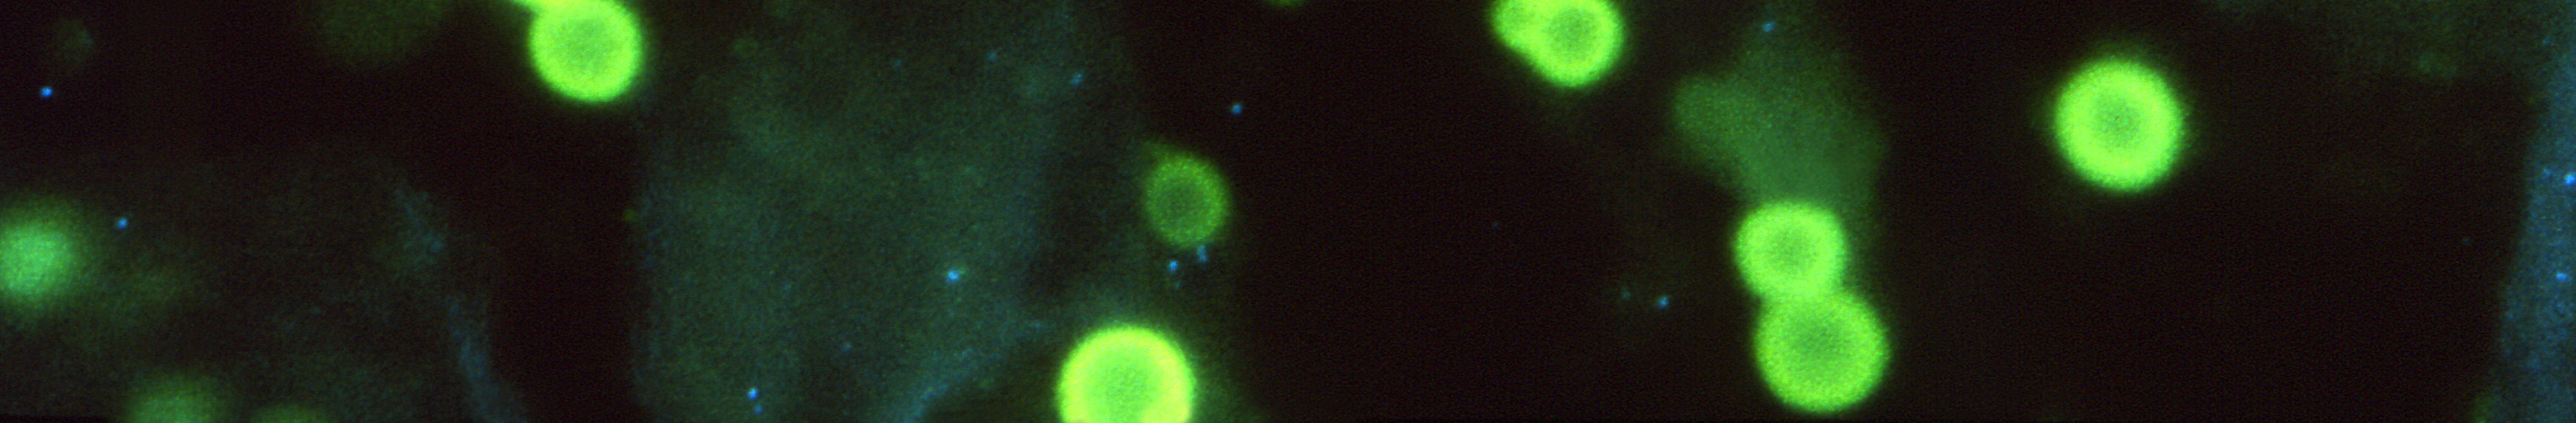 fluorescent antibody (FA)-stained sputum specimen, revealed the presence of oval shaped, budding Cryptococcus neoformans yeast cells, KAplan/CDC 1972